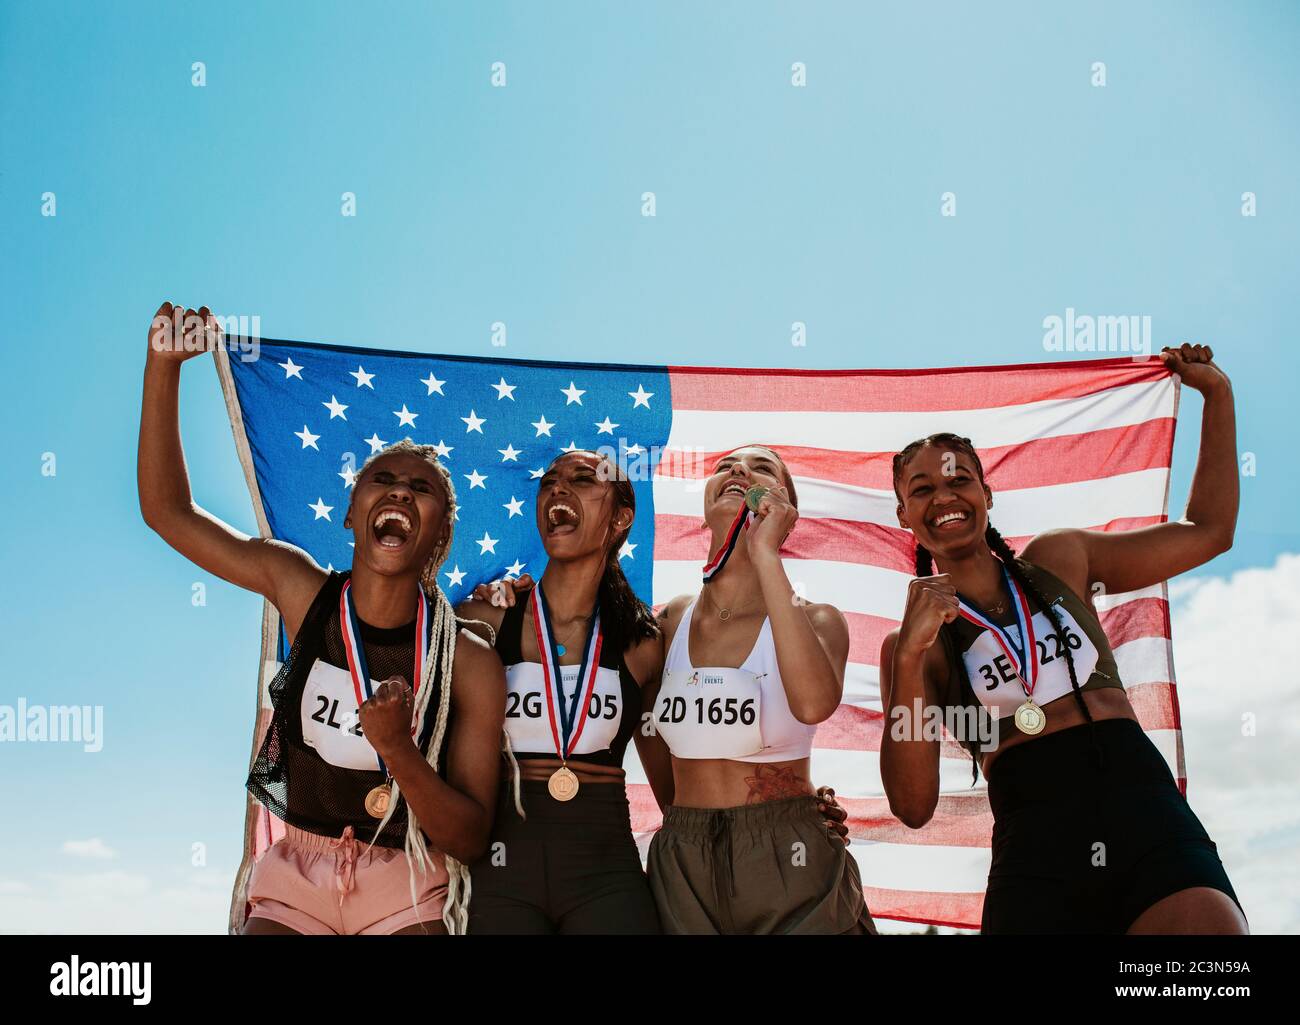 Group of four US athletes with national flag. Women runners with medals standing together holding American national flag. Stock Photo